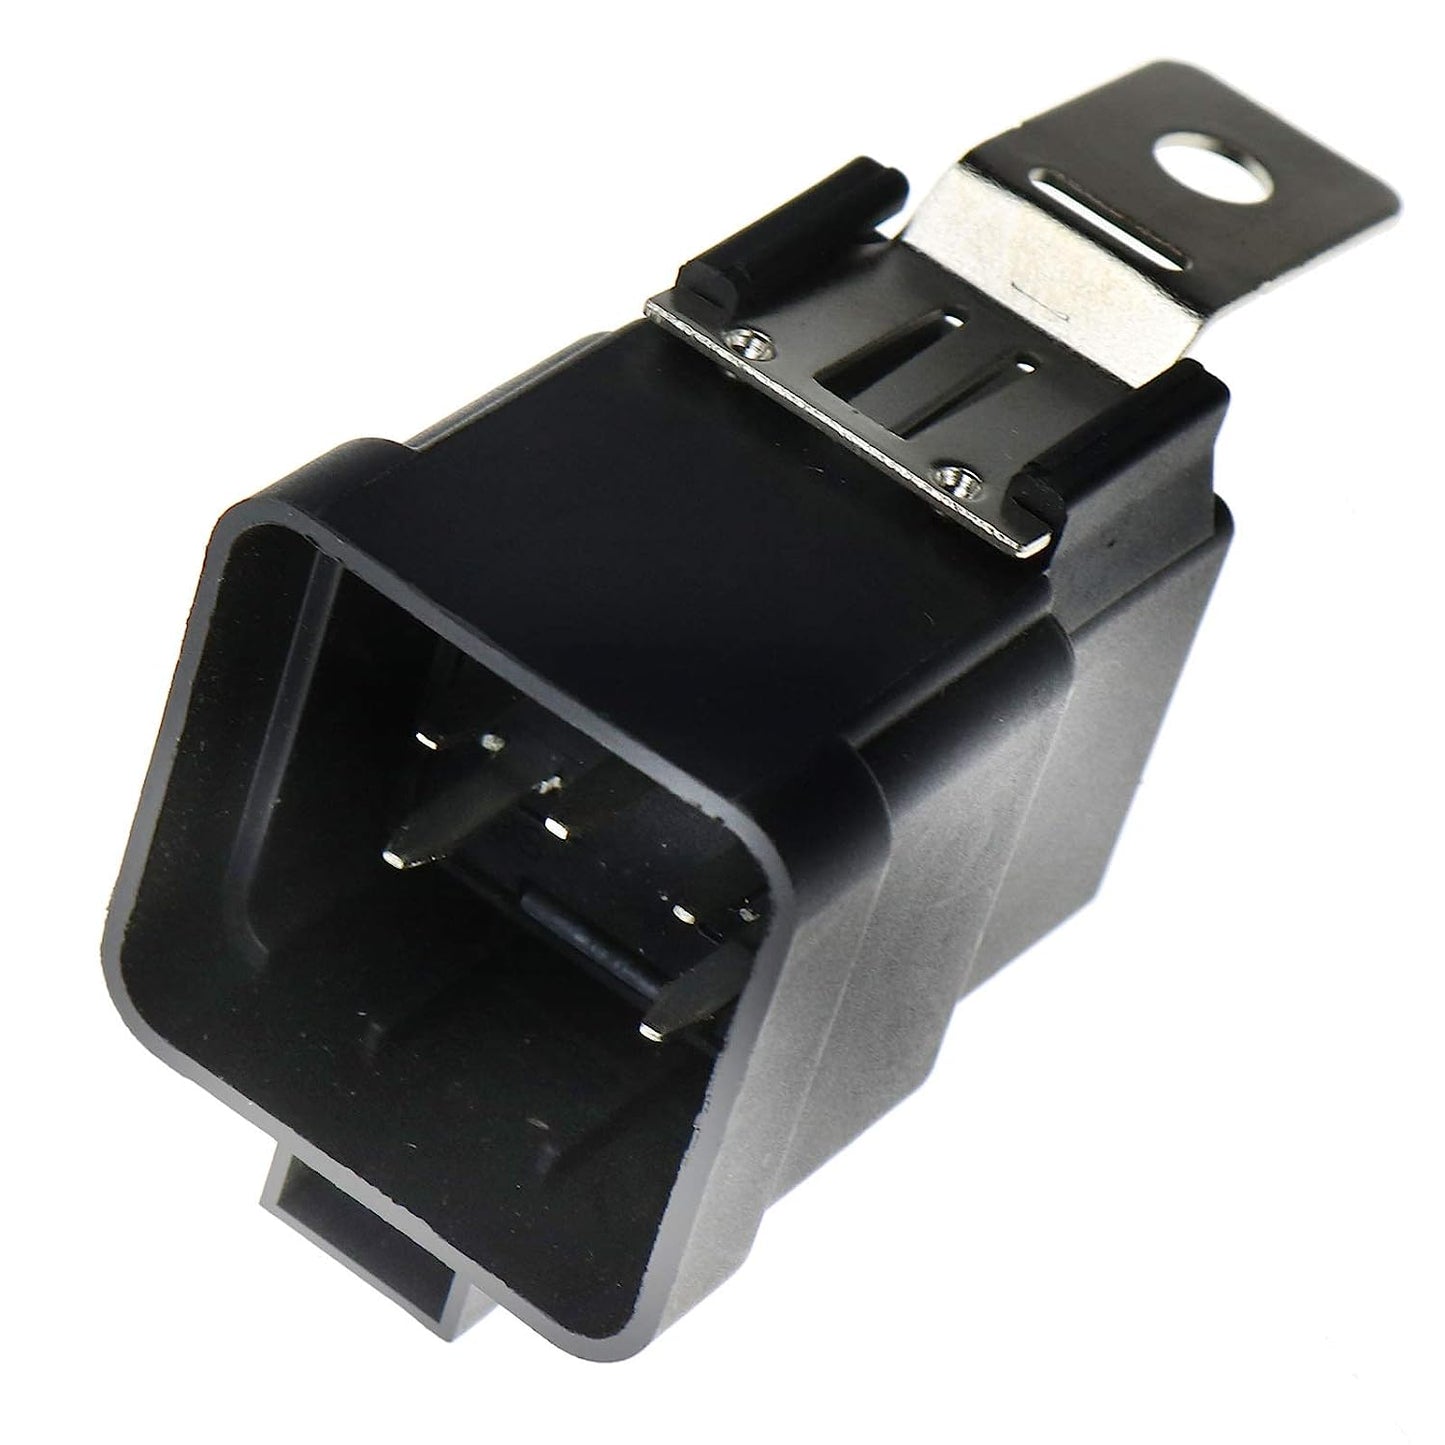 6670312 Relay Switch Compatible With Bobcat 731 732 741 742 743 751 753 763 Skid Steer Loader